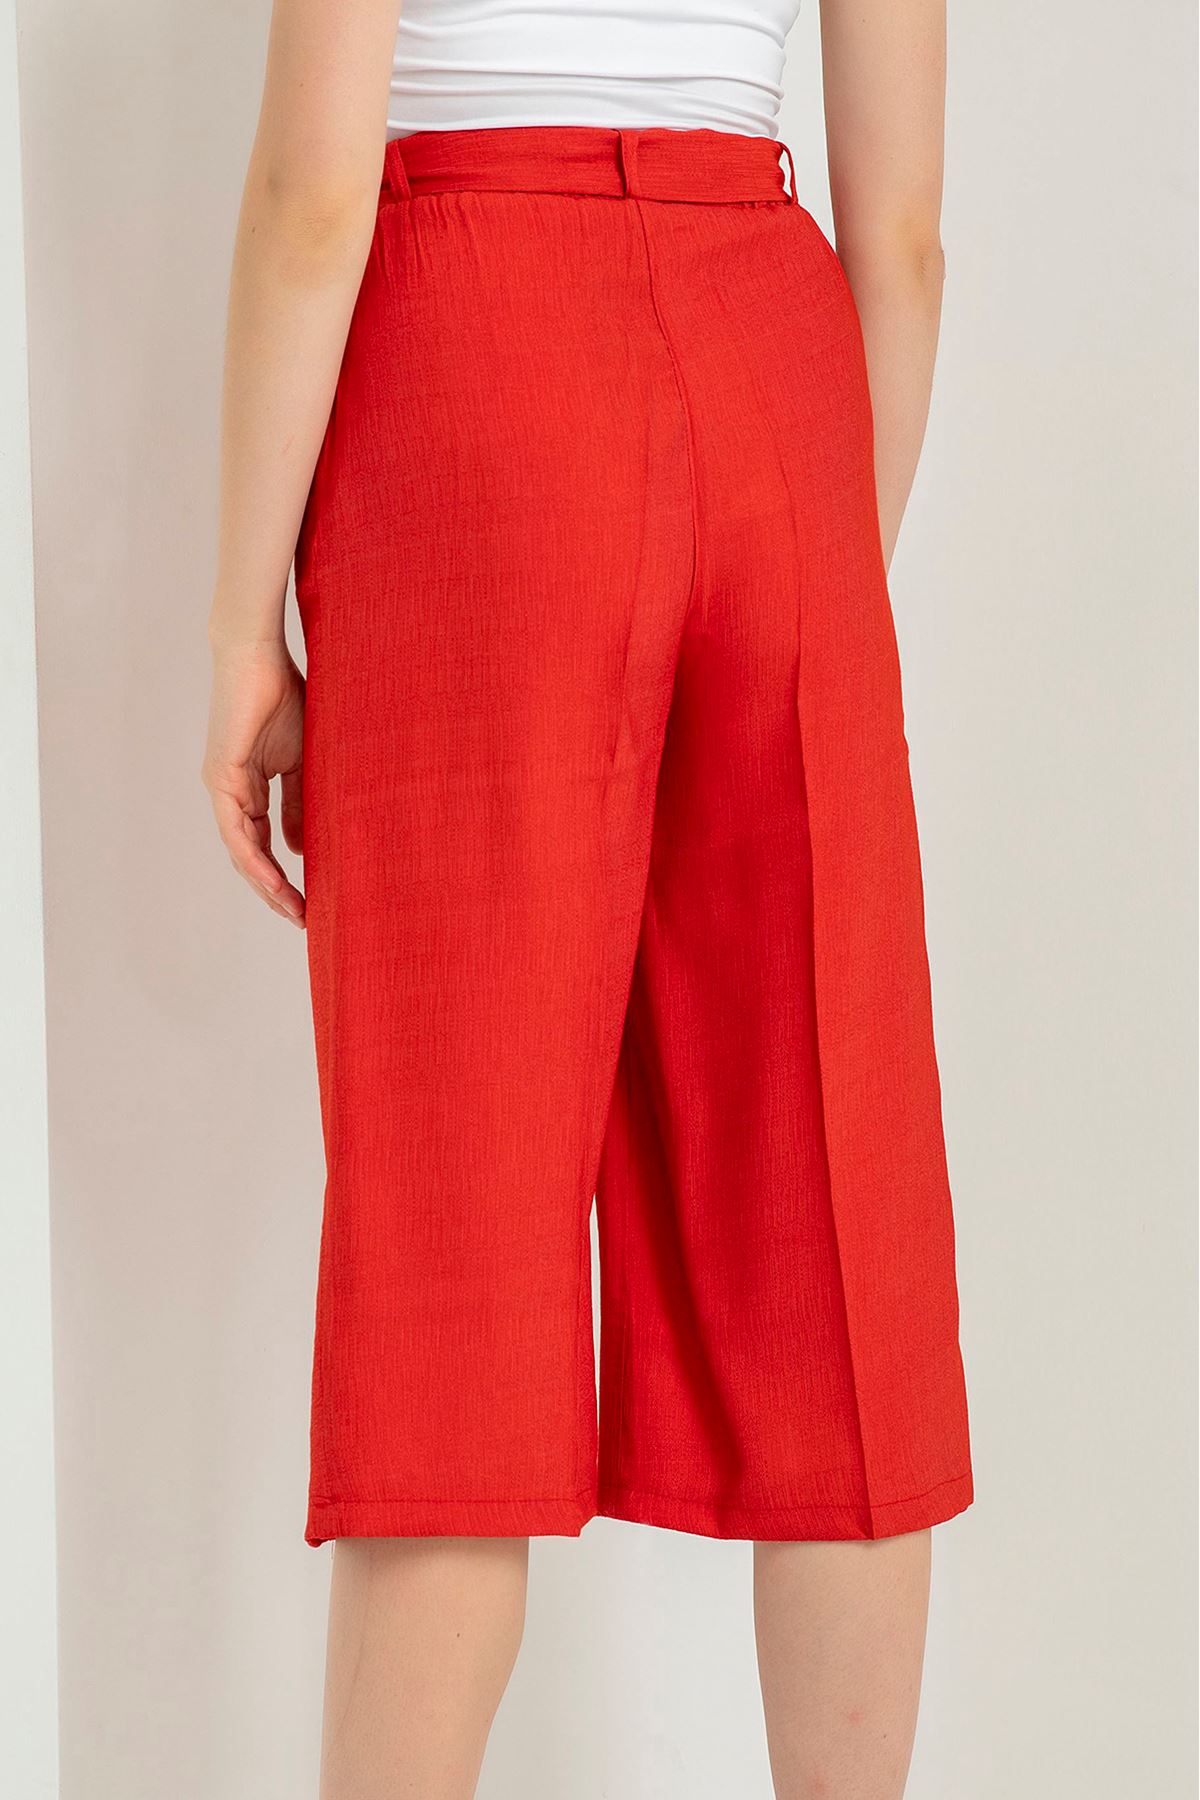 Linen Fabric 3/4 Short Comfy Fit Belted Women'S Trouser - Red